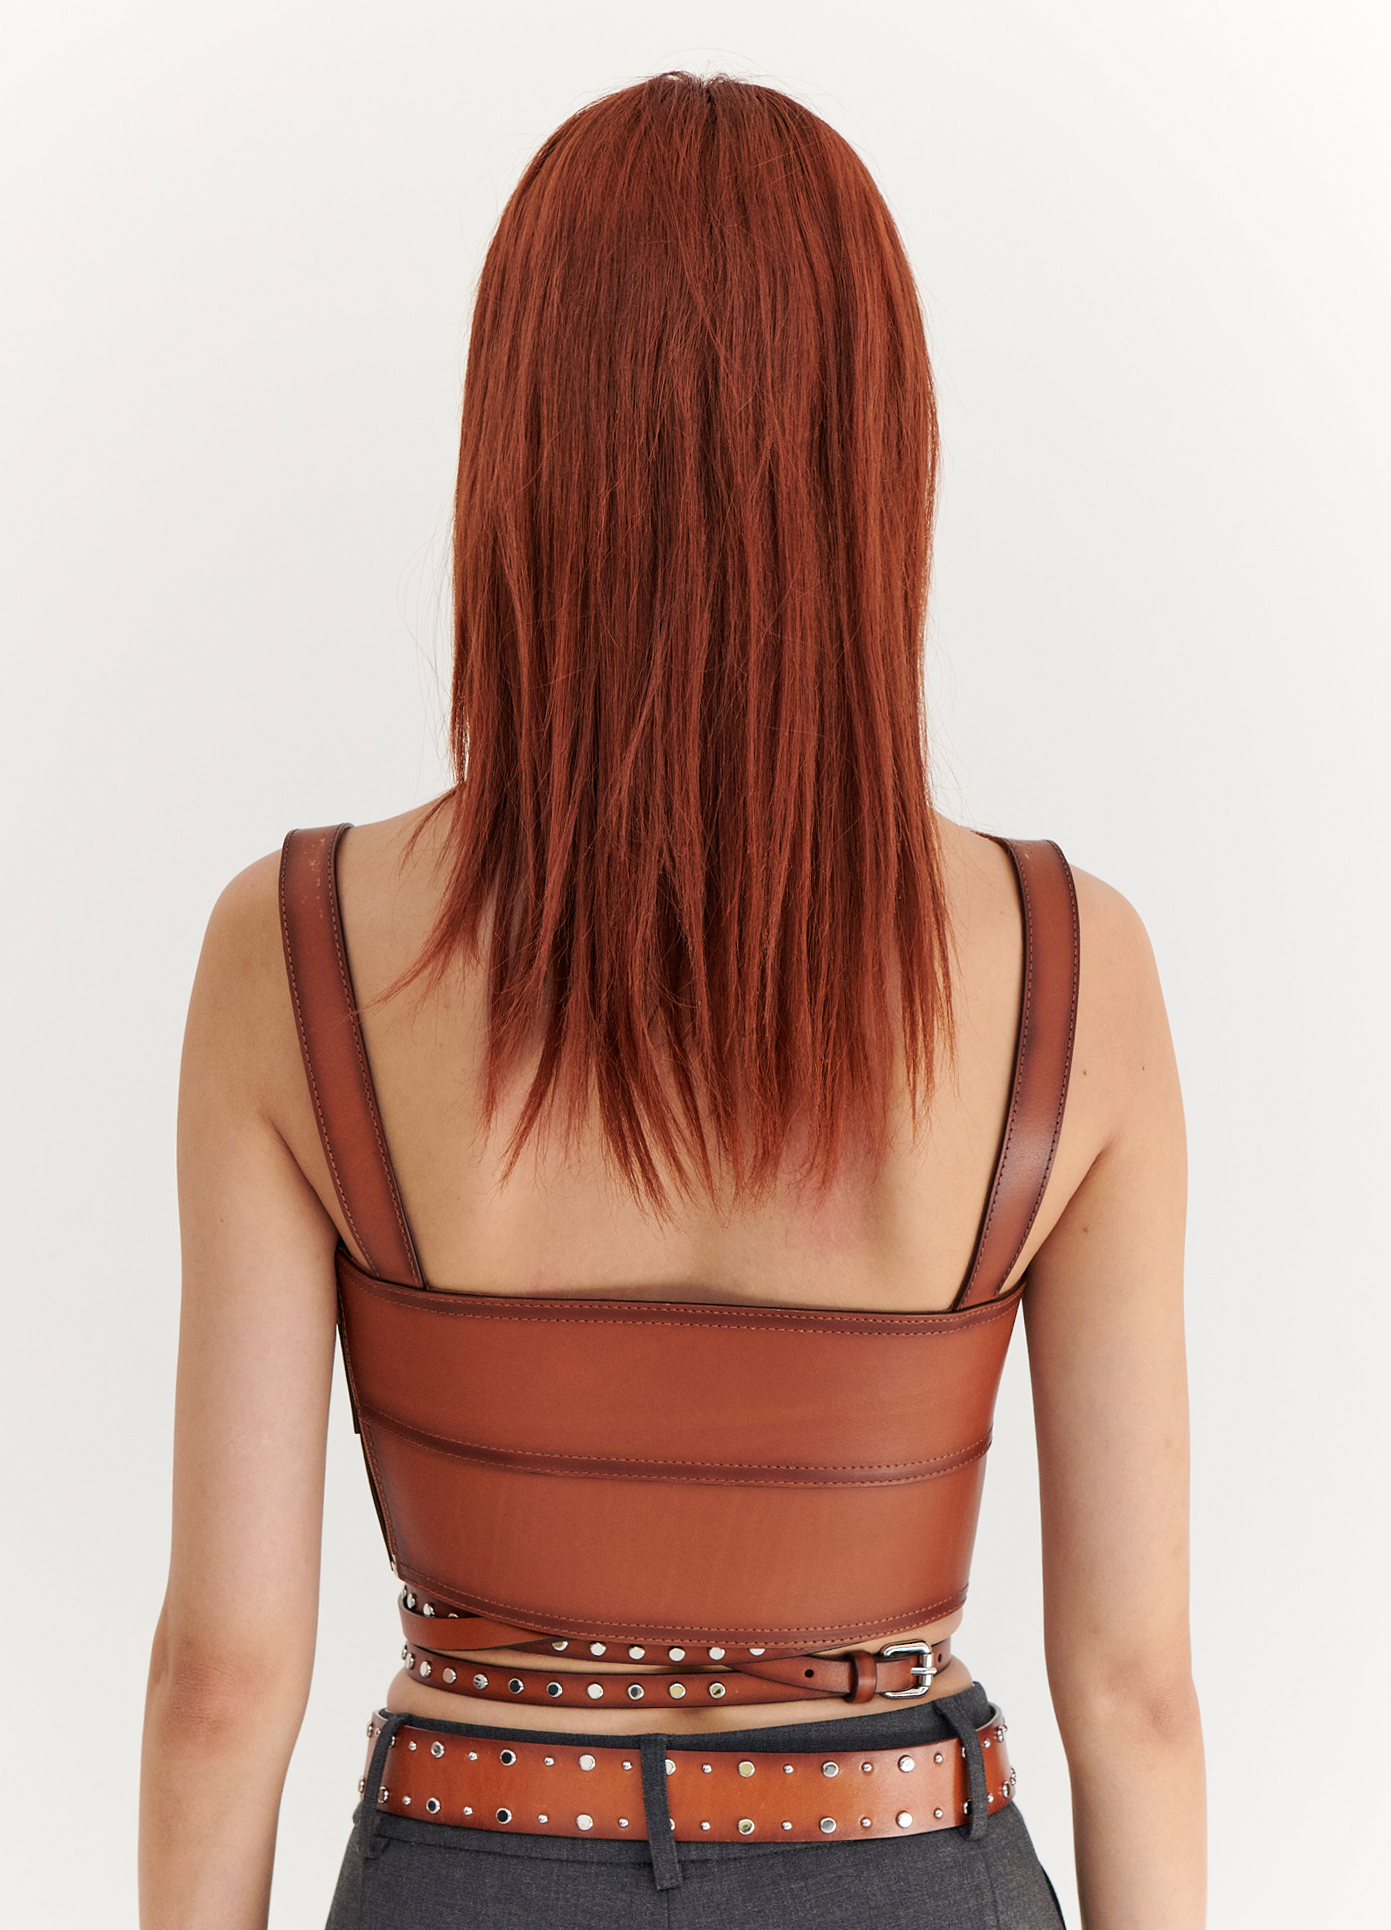 MONSE Leather Bustier in Brown on model back view